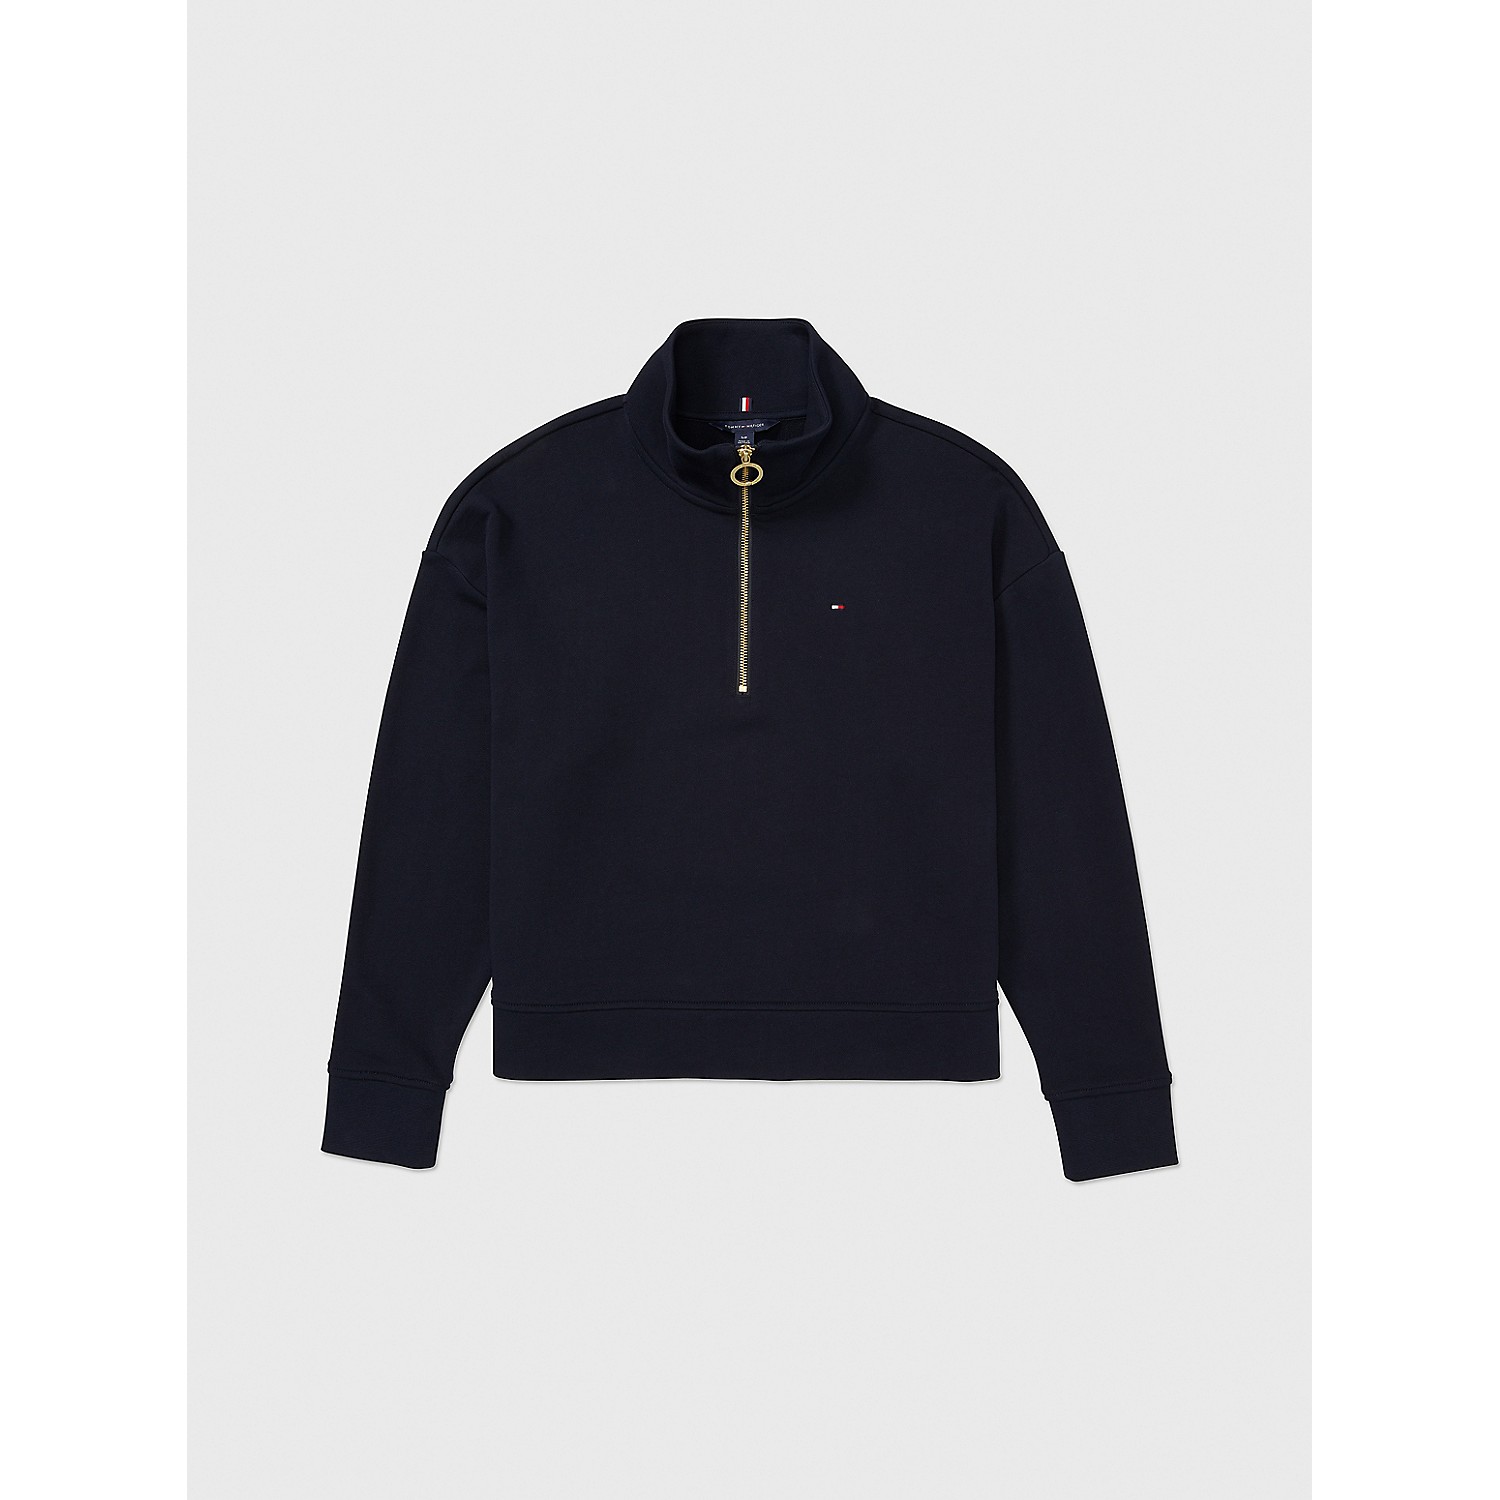 TOMMY HILFIGER Relaxed Fit Zip Sweatshirt